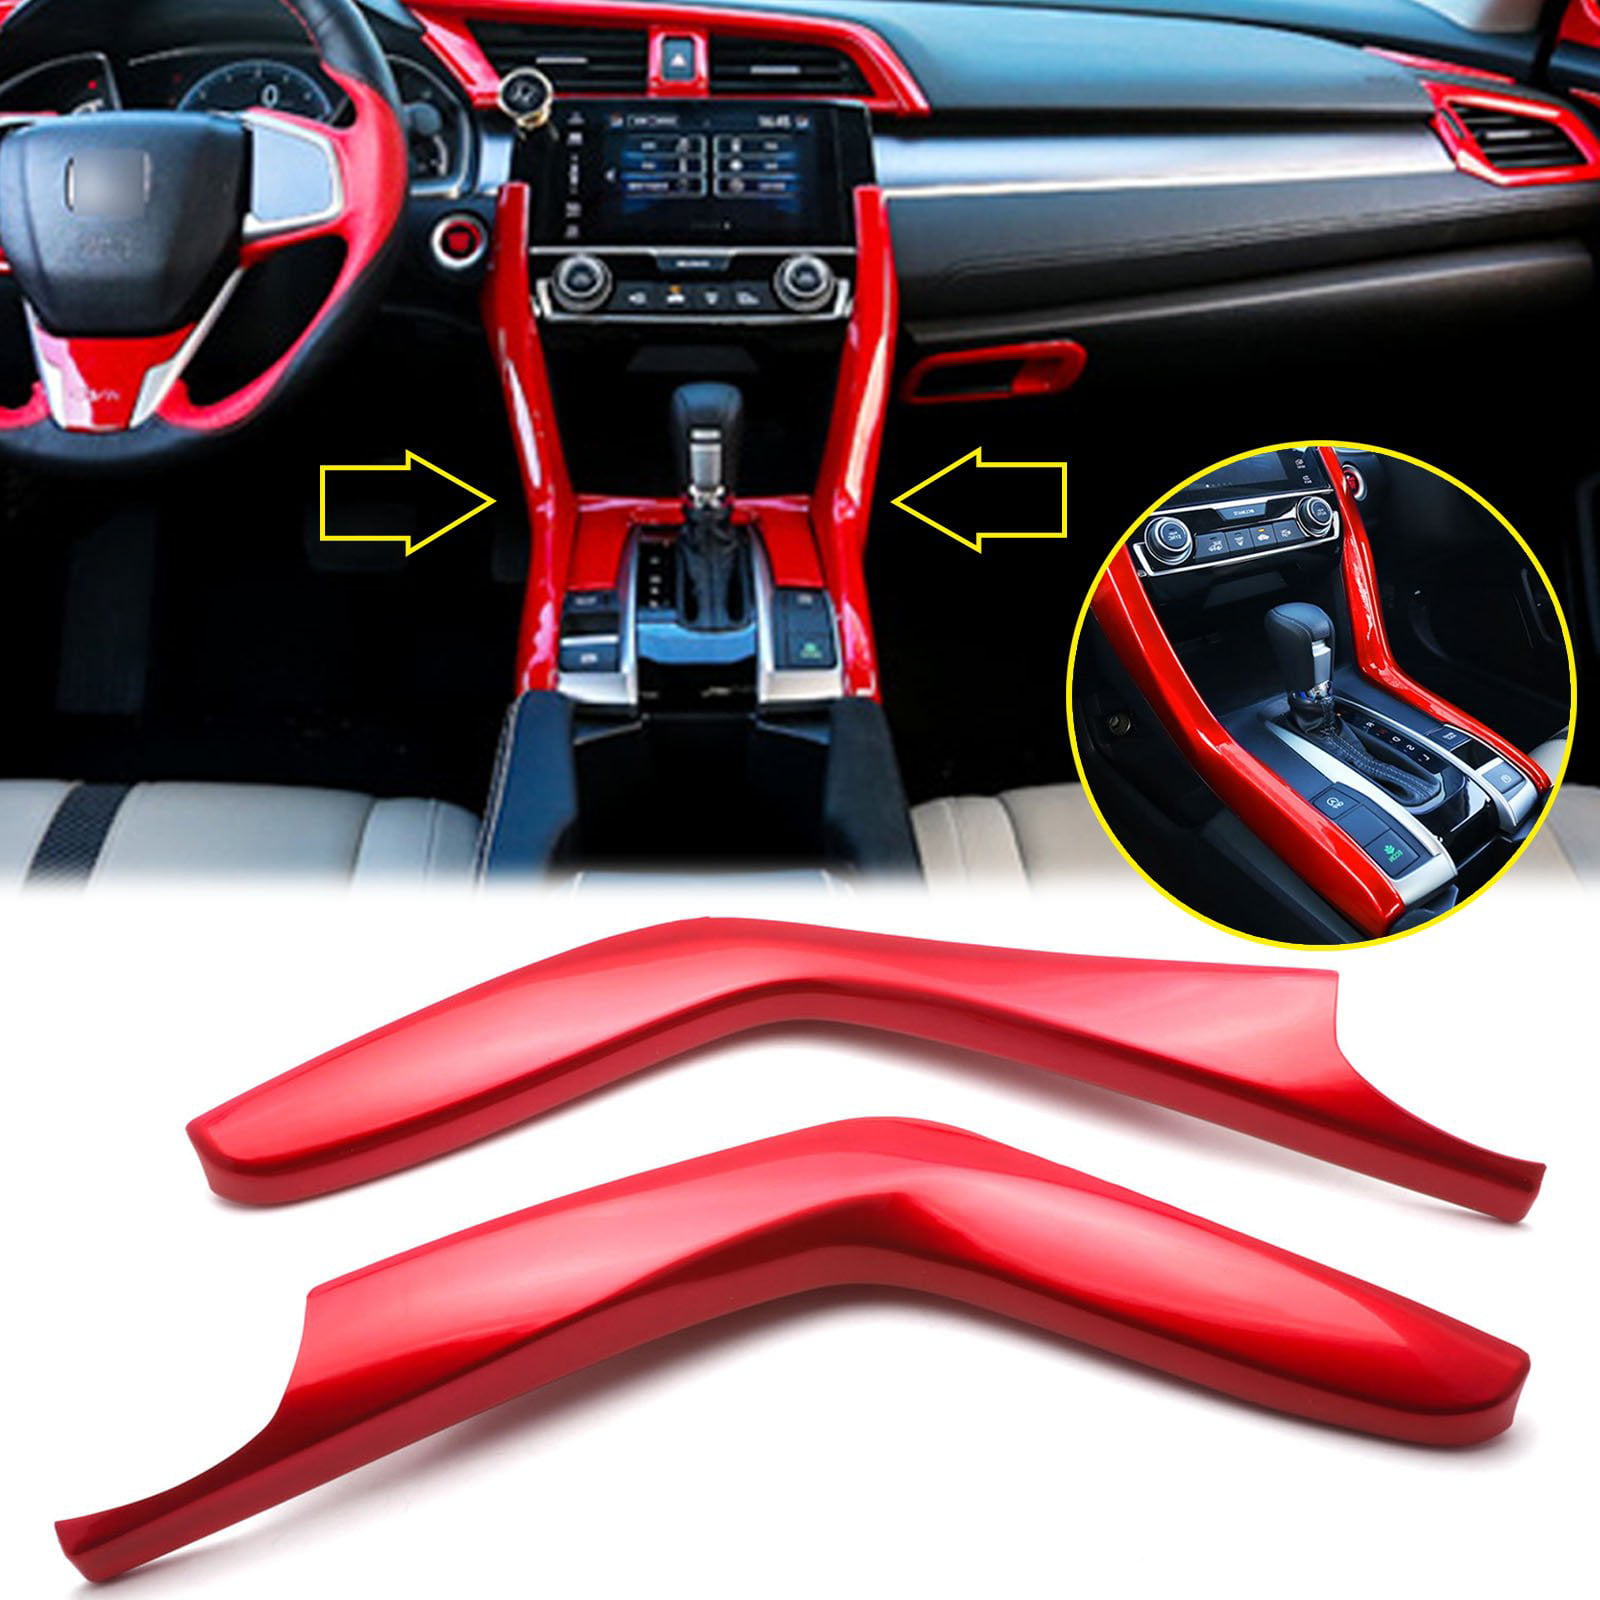 1x red Center Console Air Conditioning Panel Trim For Honda Civic 10th 2016 2017